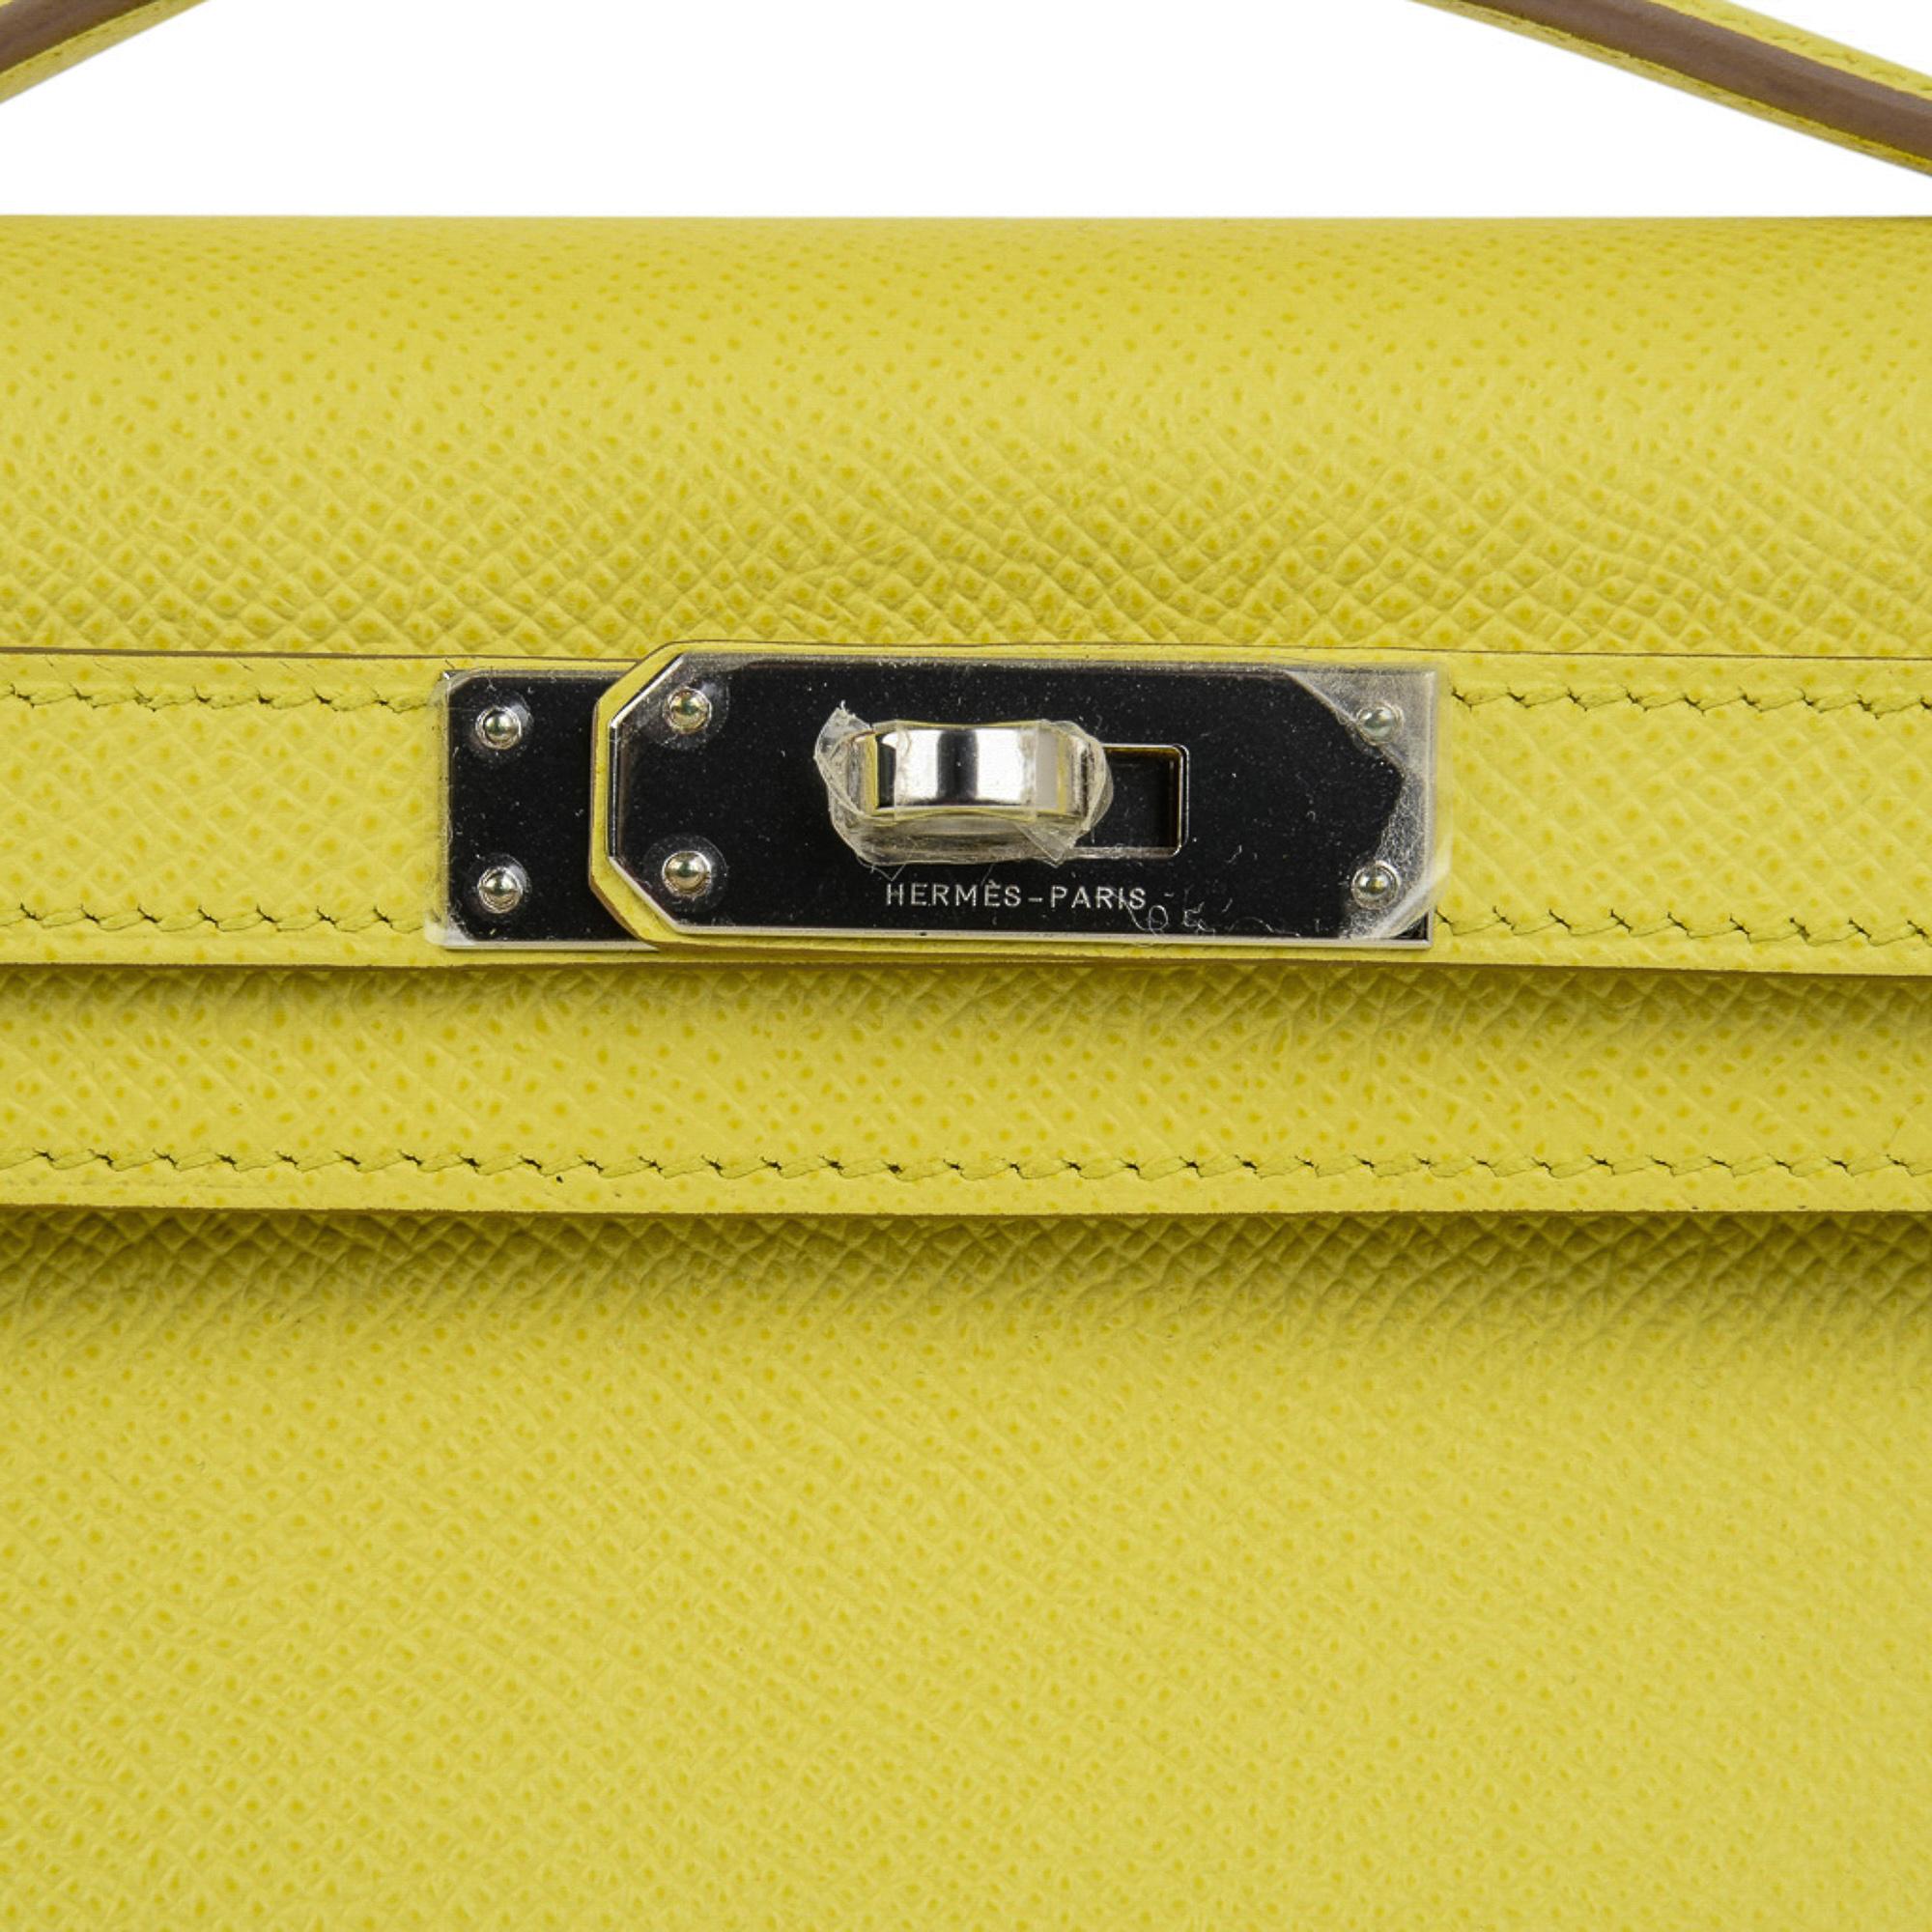 Mightychic offers a guaranteed authentic Hermes Kelly Cut bag feautred in Souffre.
Souffre is a fresh yellow pop of neutral colour and rare to find in Epsom. 
Accentuated with palladium hardware. 
This treasure is easily carried day or night, casual